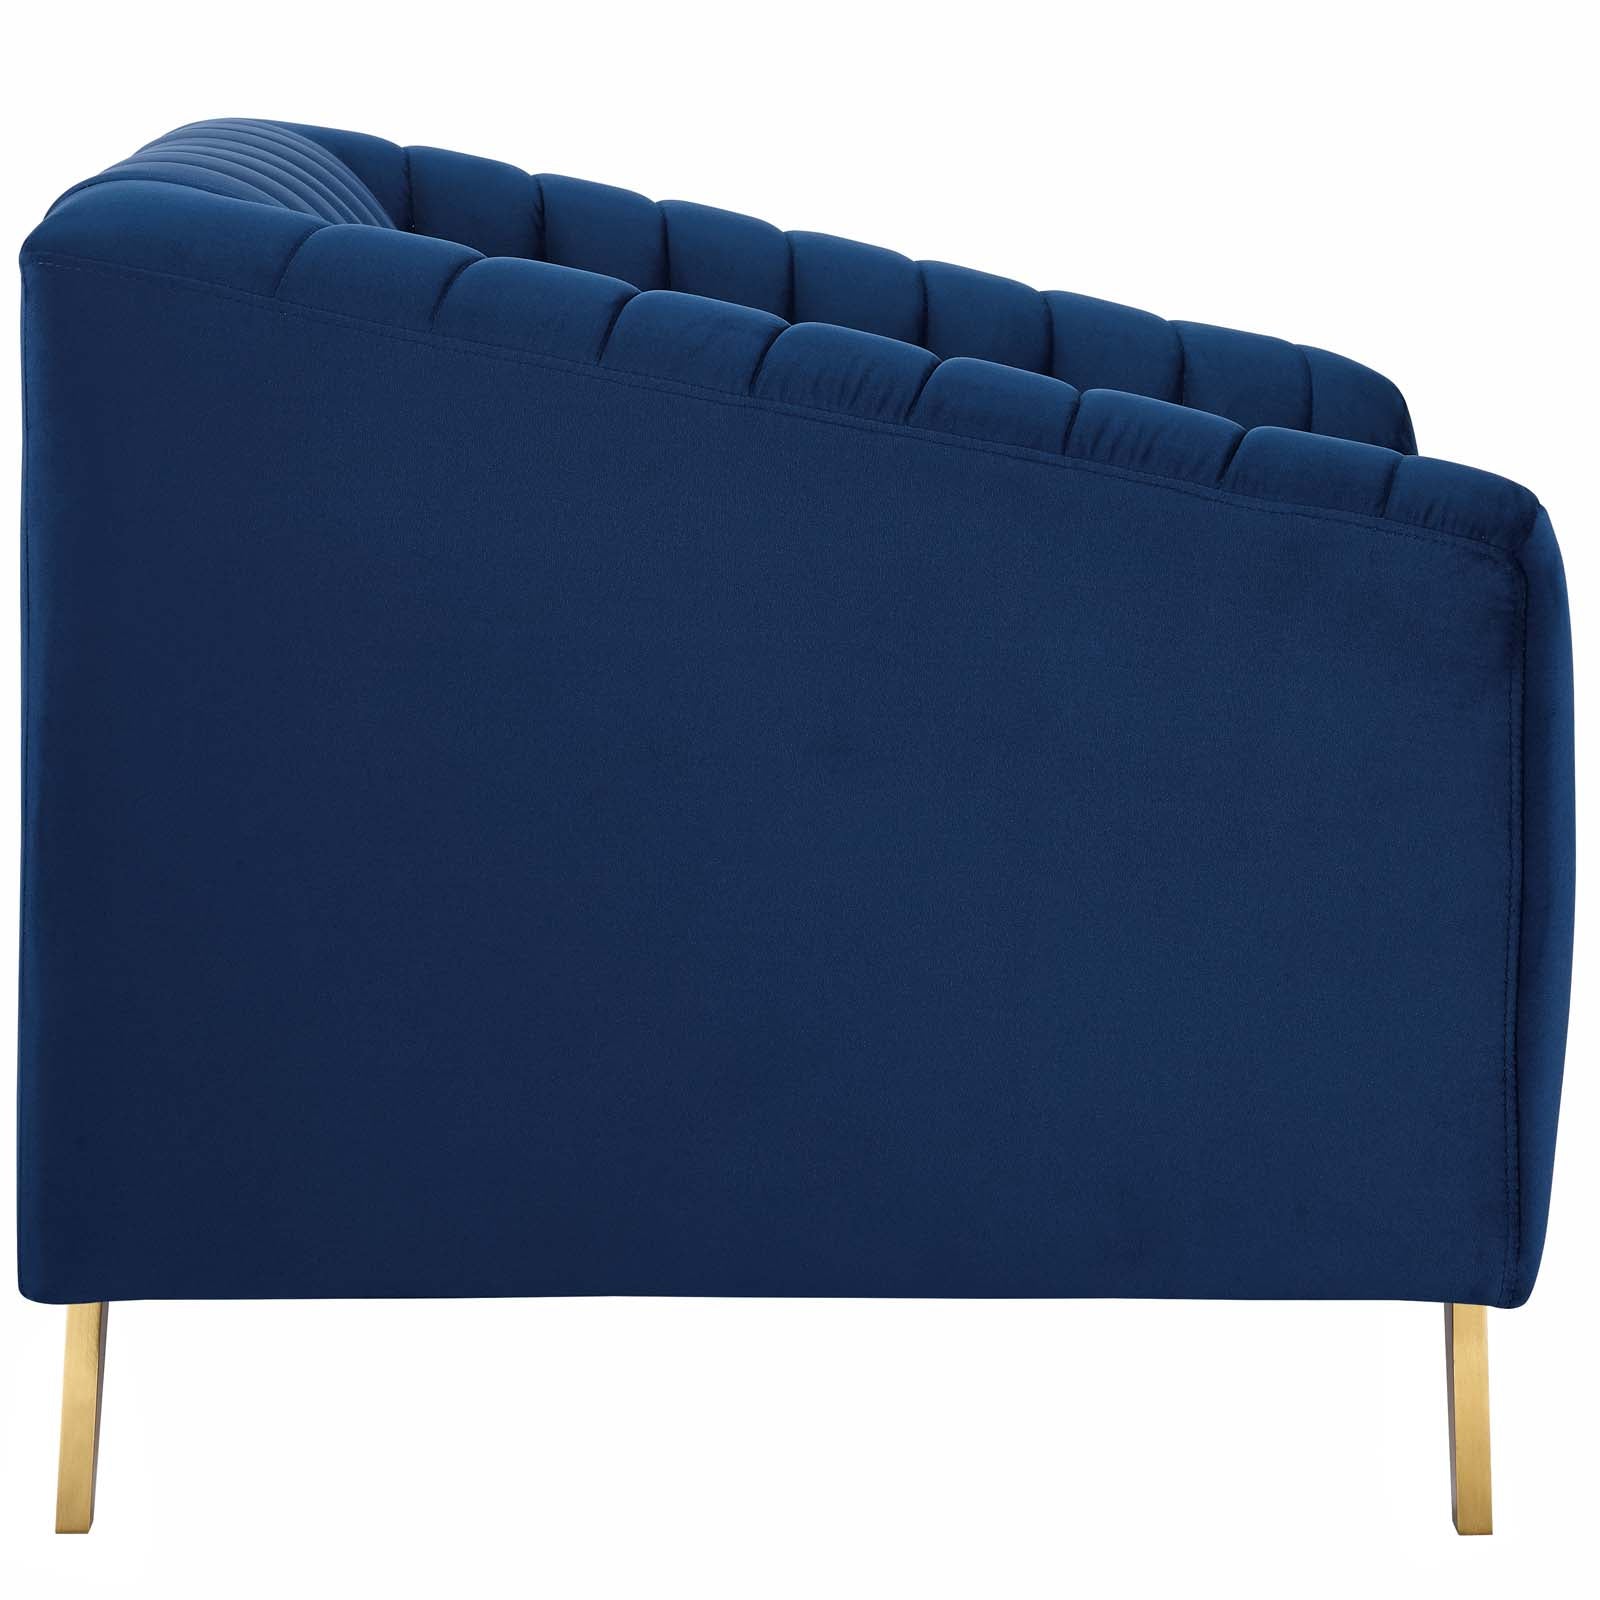 Modway Accent Chairs - Valiant Vertical Channel Tufted Performance Velvet Armchair Navy